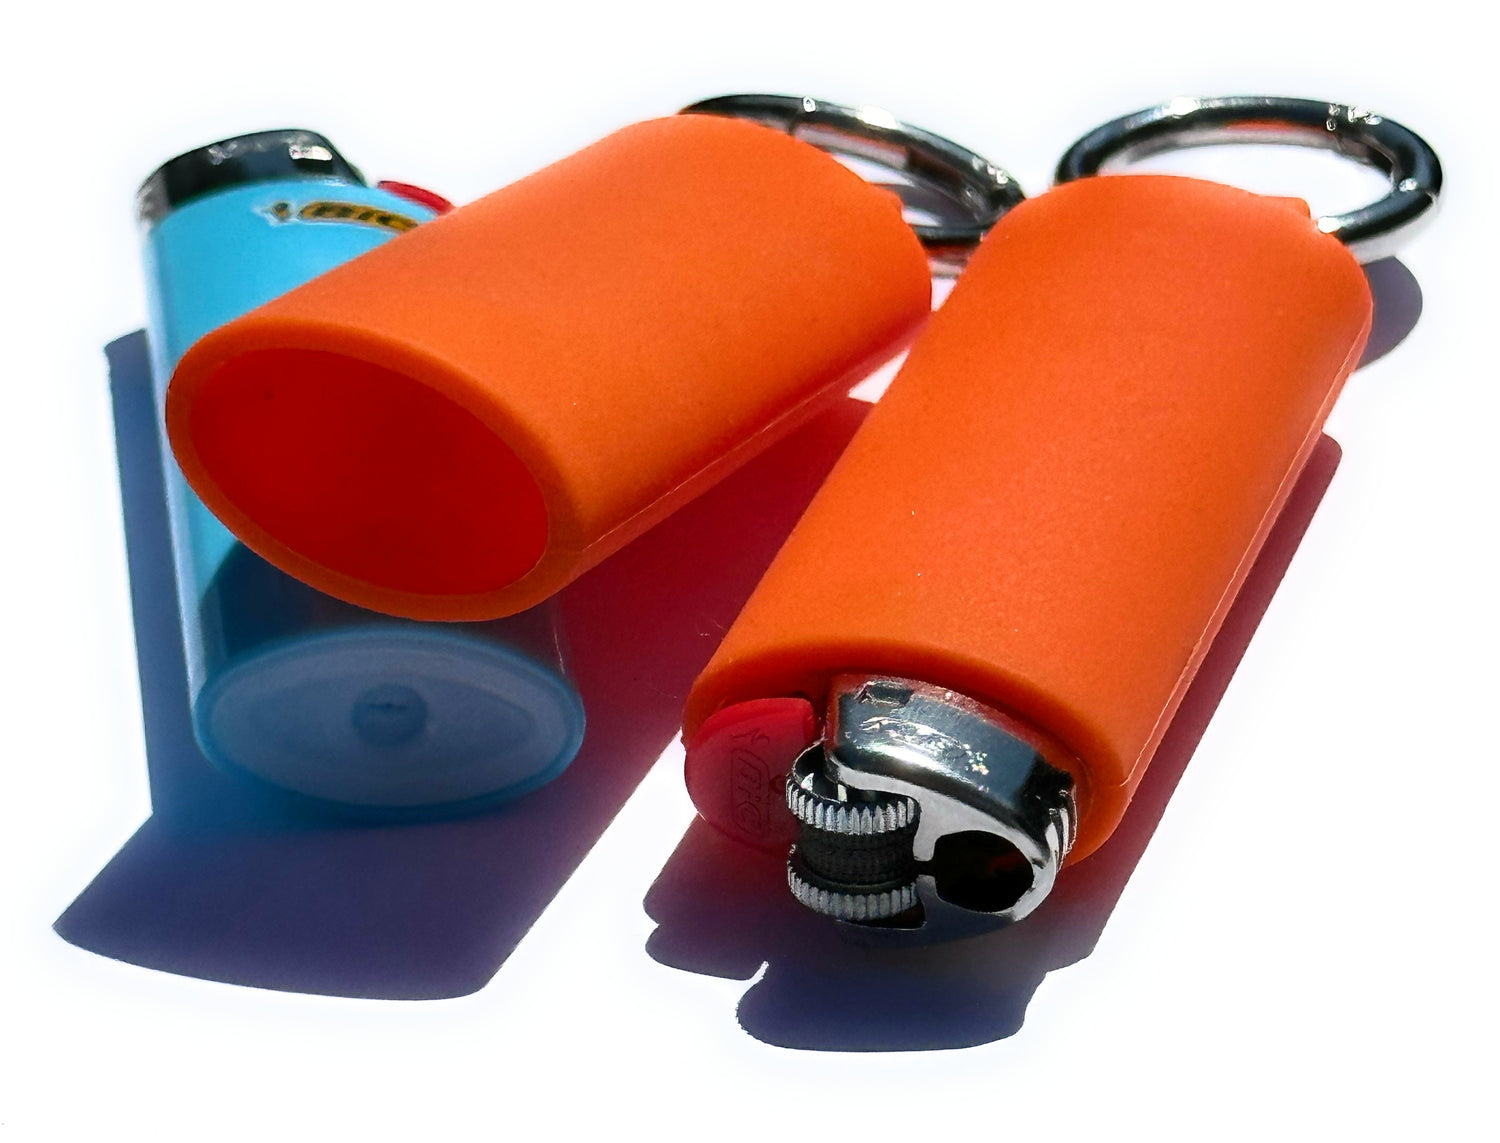 Wholesale Waterproof lighter case for J6 colorful plastic lighter holder  keychain From m.